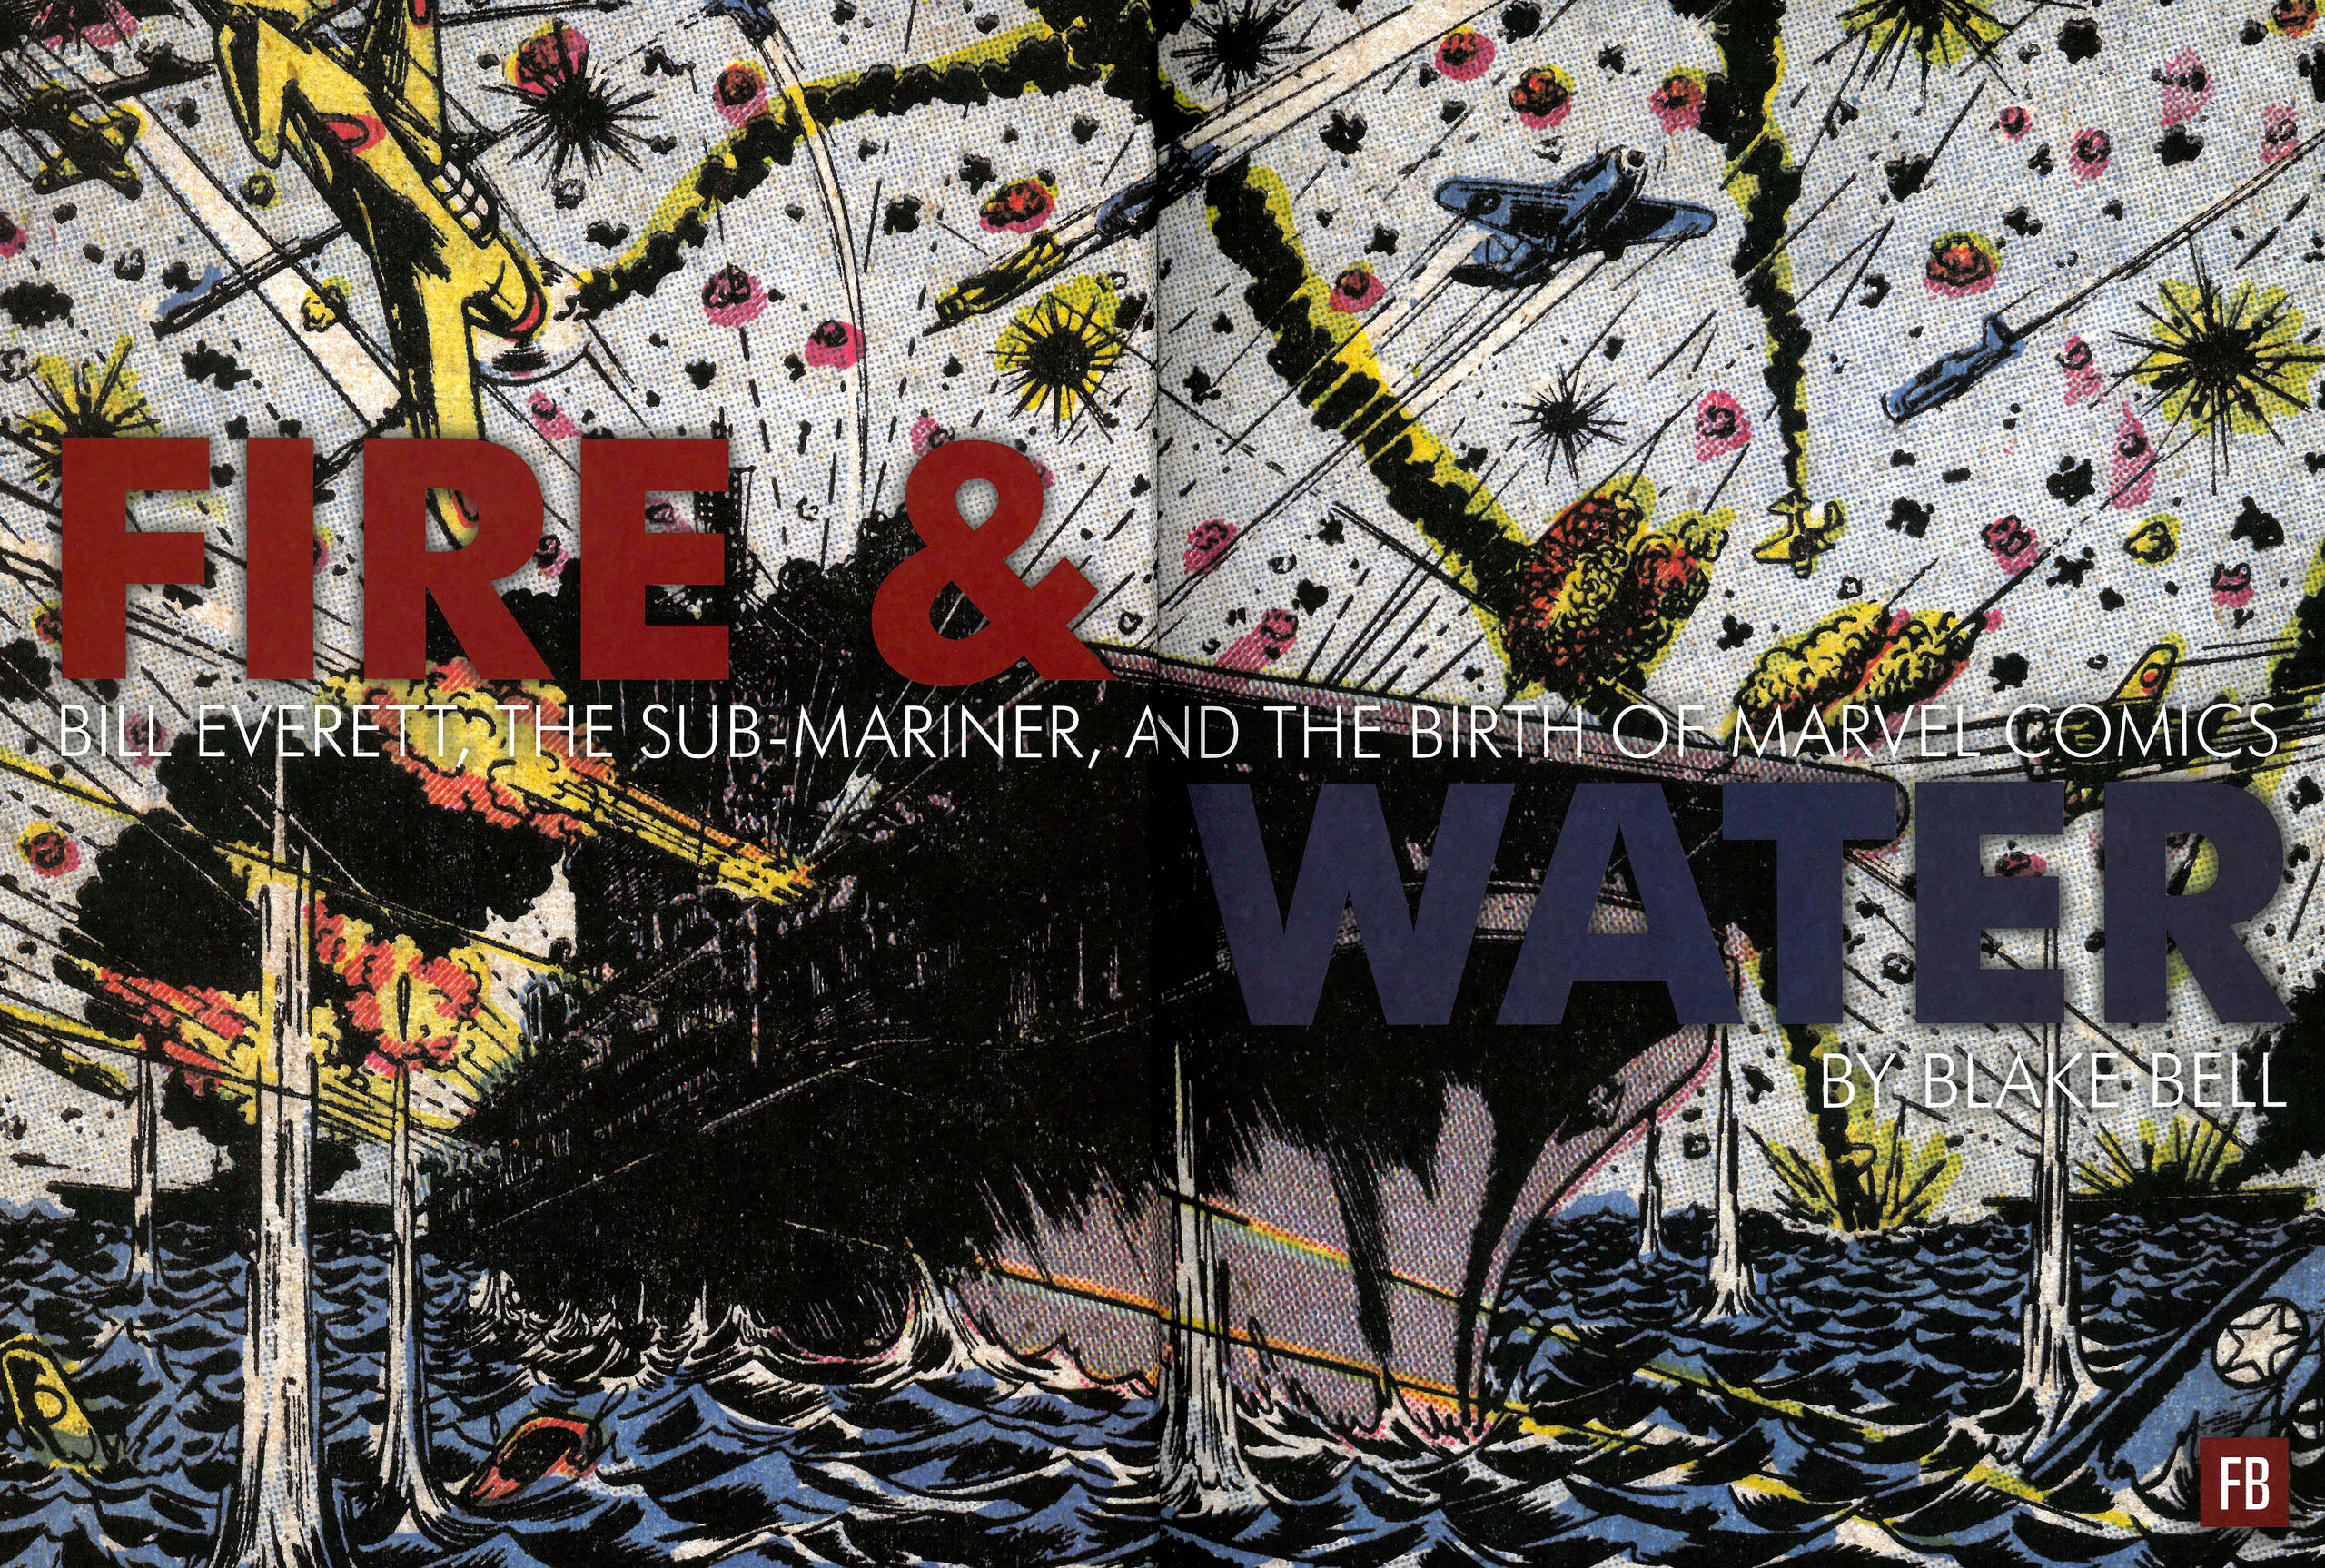 Read online Fire and Water: Bill Everett, the Sub-Mariner, and the Birth of Marvel Comics comic -  Issue # TPB (Part 1) - 7